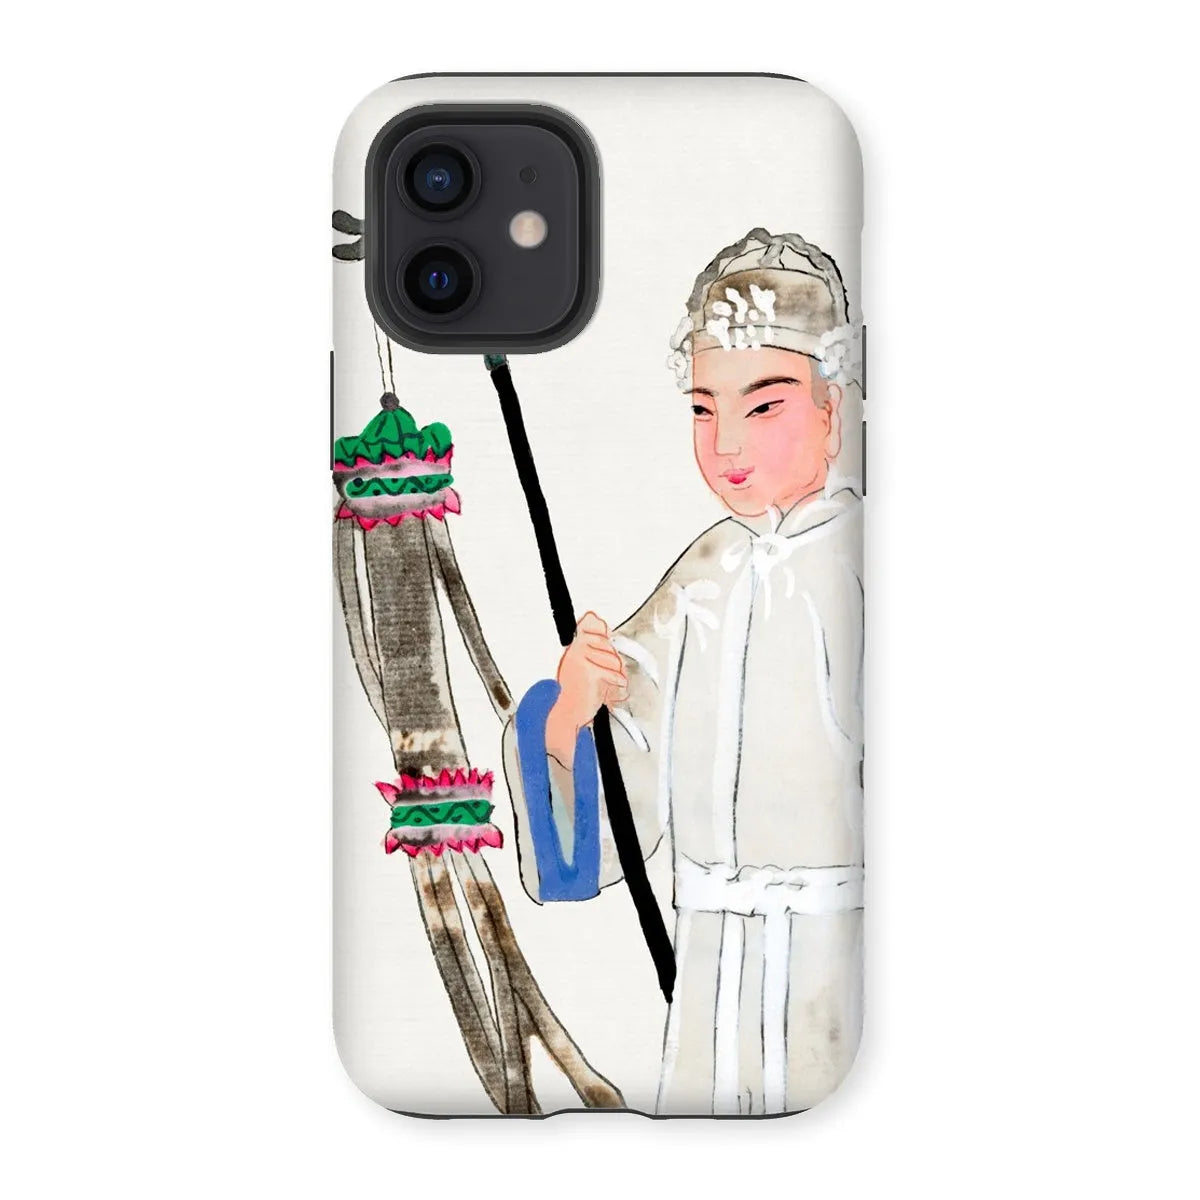 Man In Mourning - Chinese Historical Art Phone Case - Iphone 12 / Matte - Mobile Phone Cases - Aesthetic Art